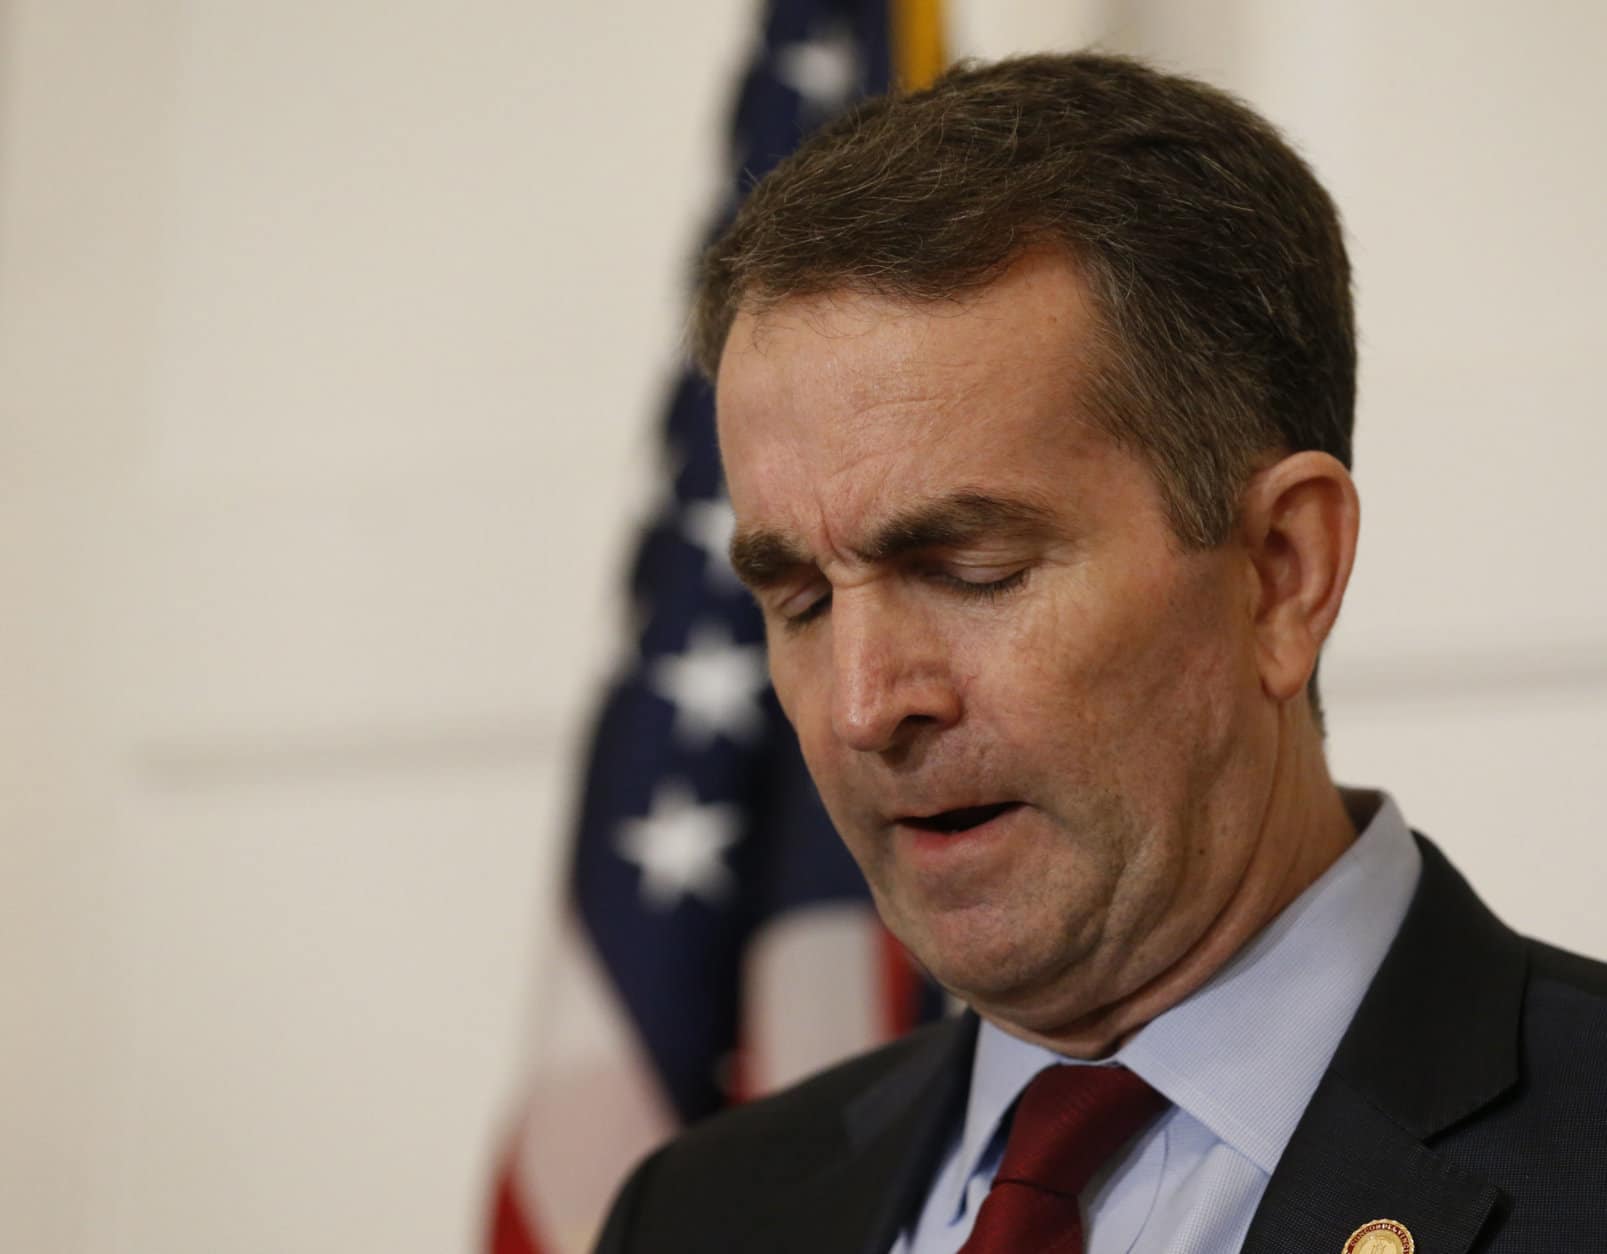 Virginia Gov. Ralph Northam, pauses during a news conference in the Governors Mansion at the Capitol in Richmond, Va., Saturday, Feb. 2, 2019. Northam is under fire for a racial photo that appeared in his college yearbook. (AP Photo/Steve Helber)